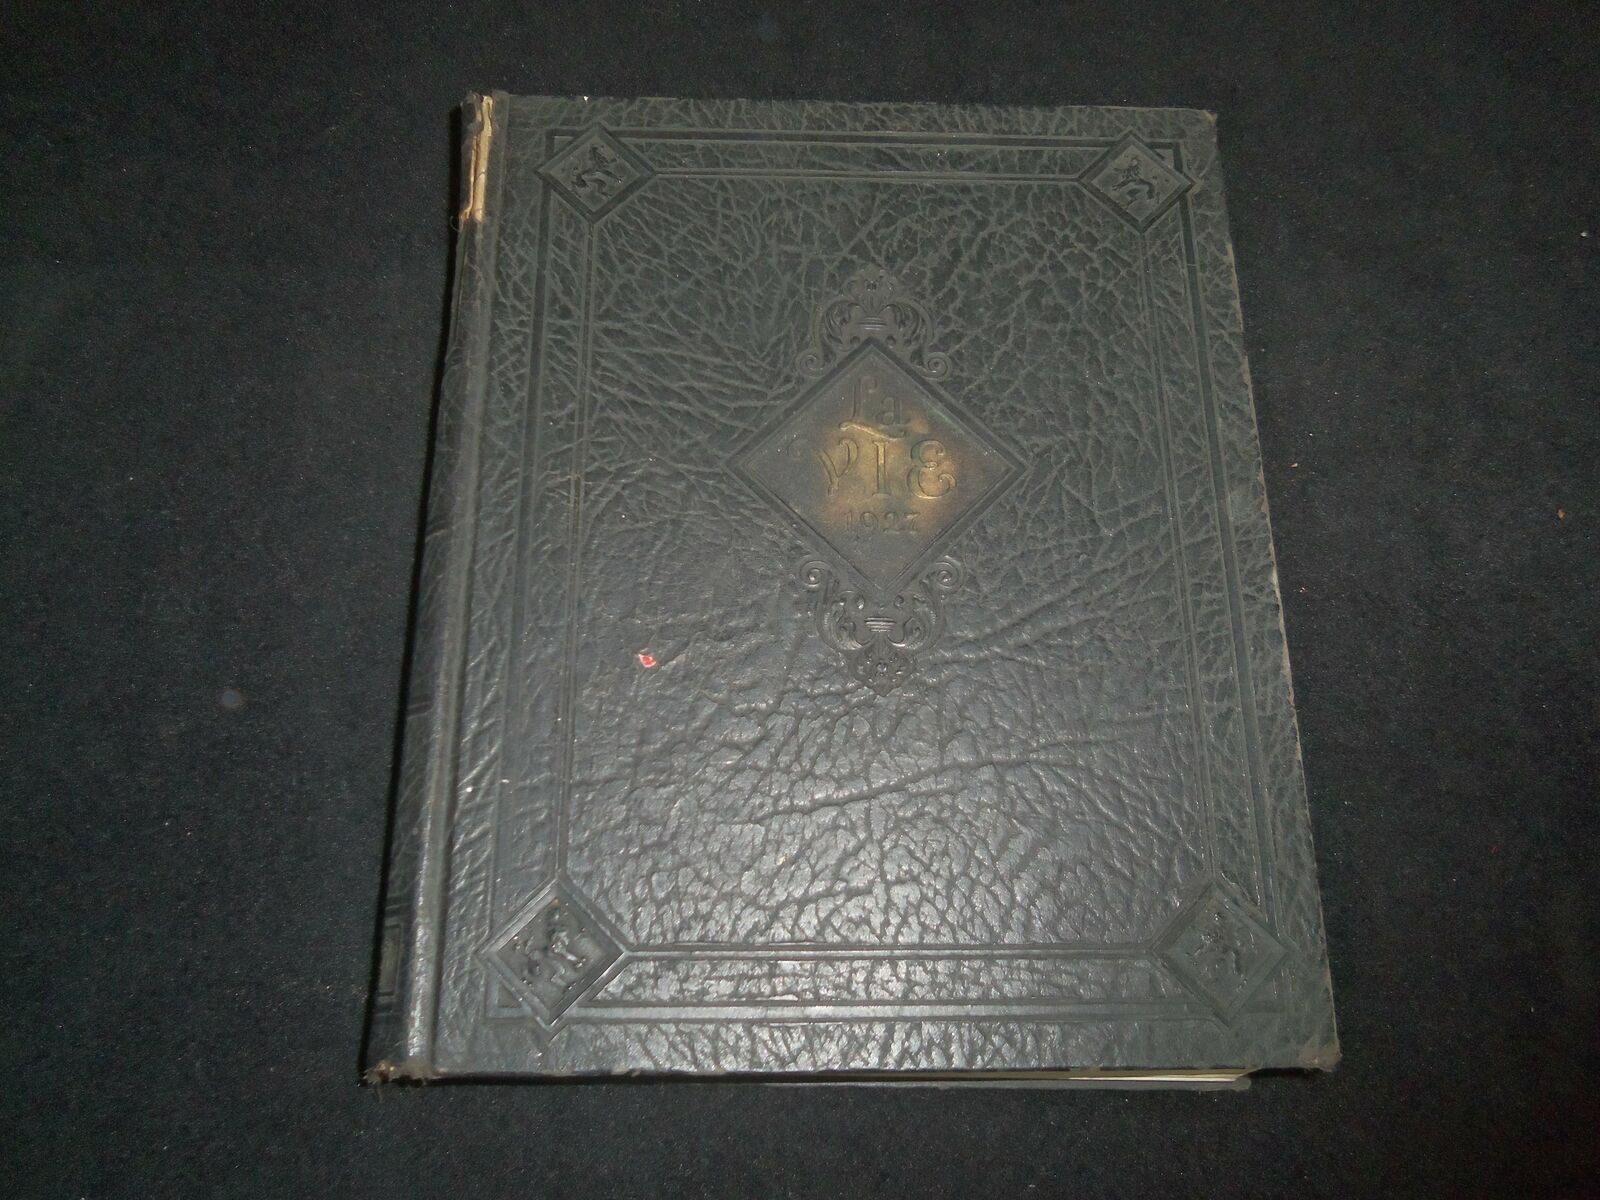 1926 LA VIE PENNSYLVANIA STATE COLLEGE YEARBOOK - STATE COLLEGE, PA - YB 2540